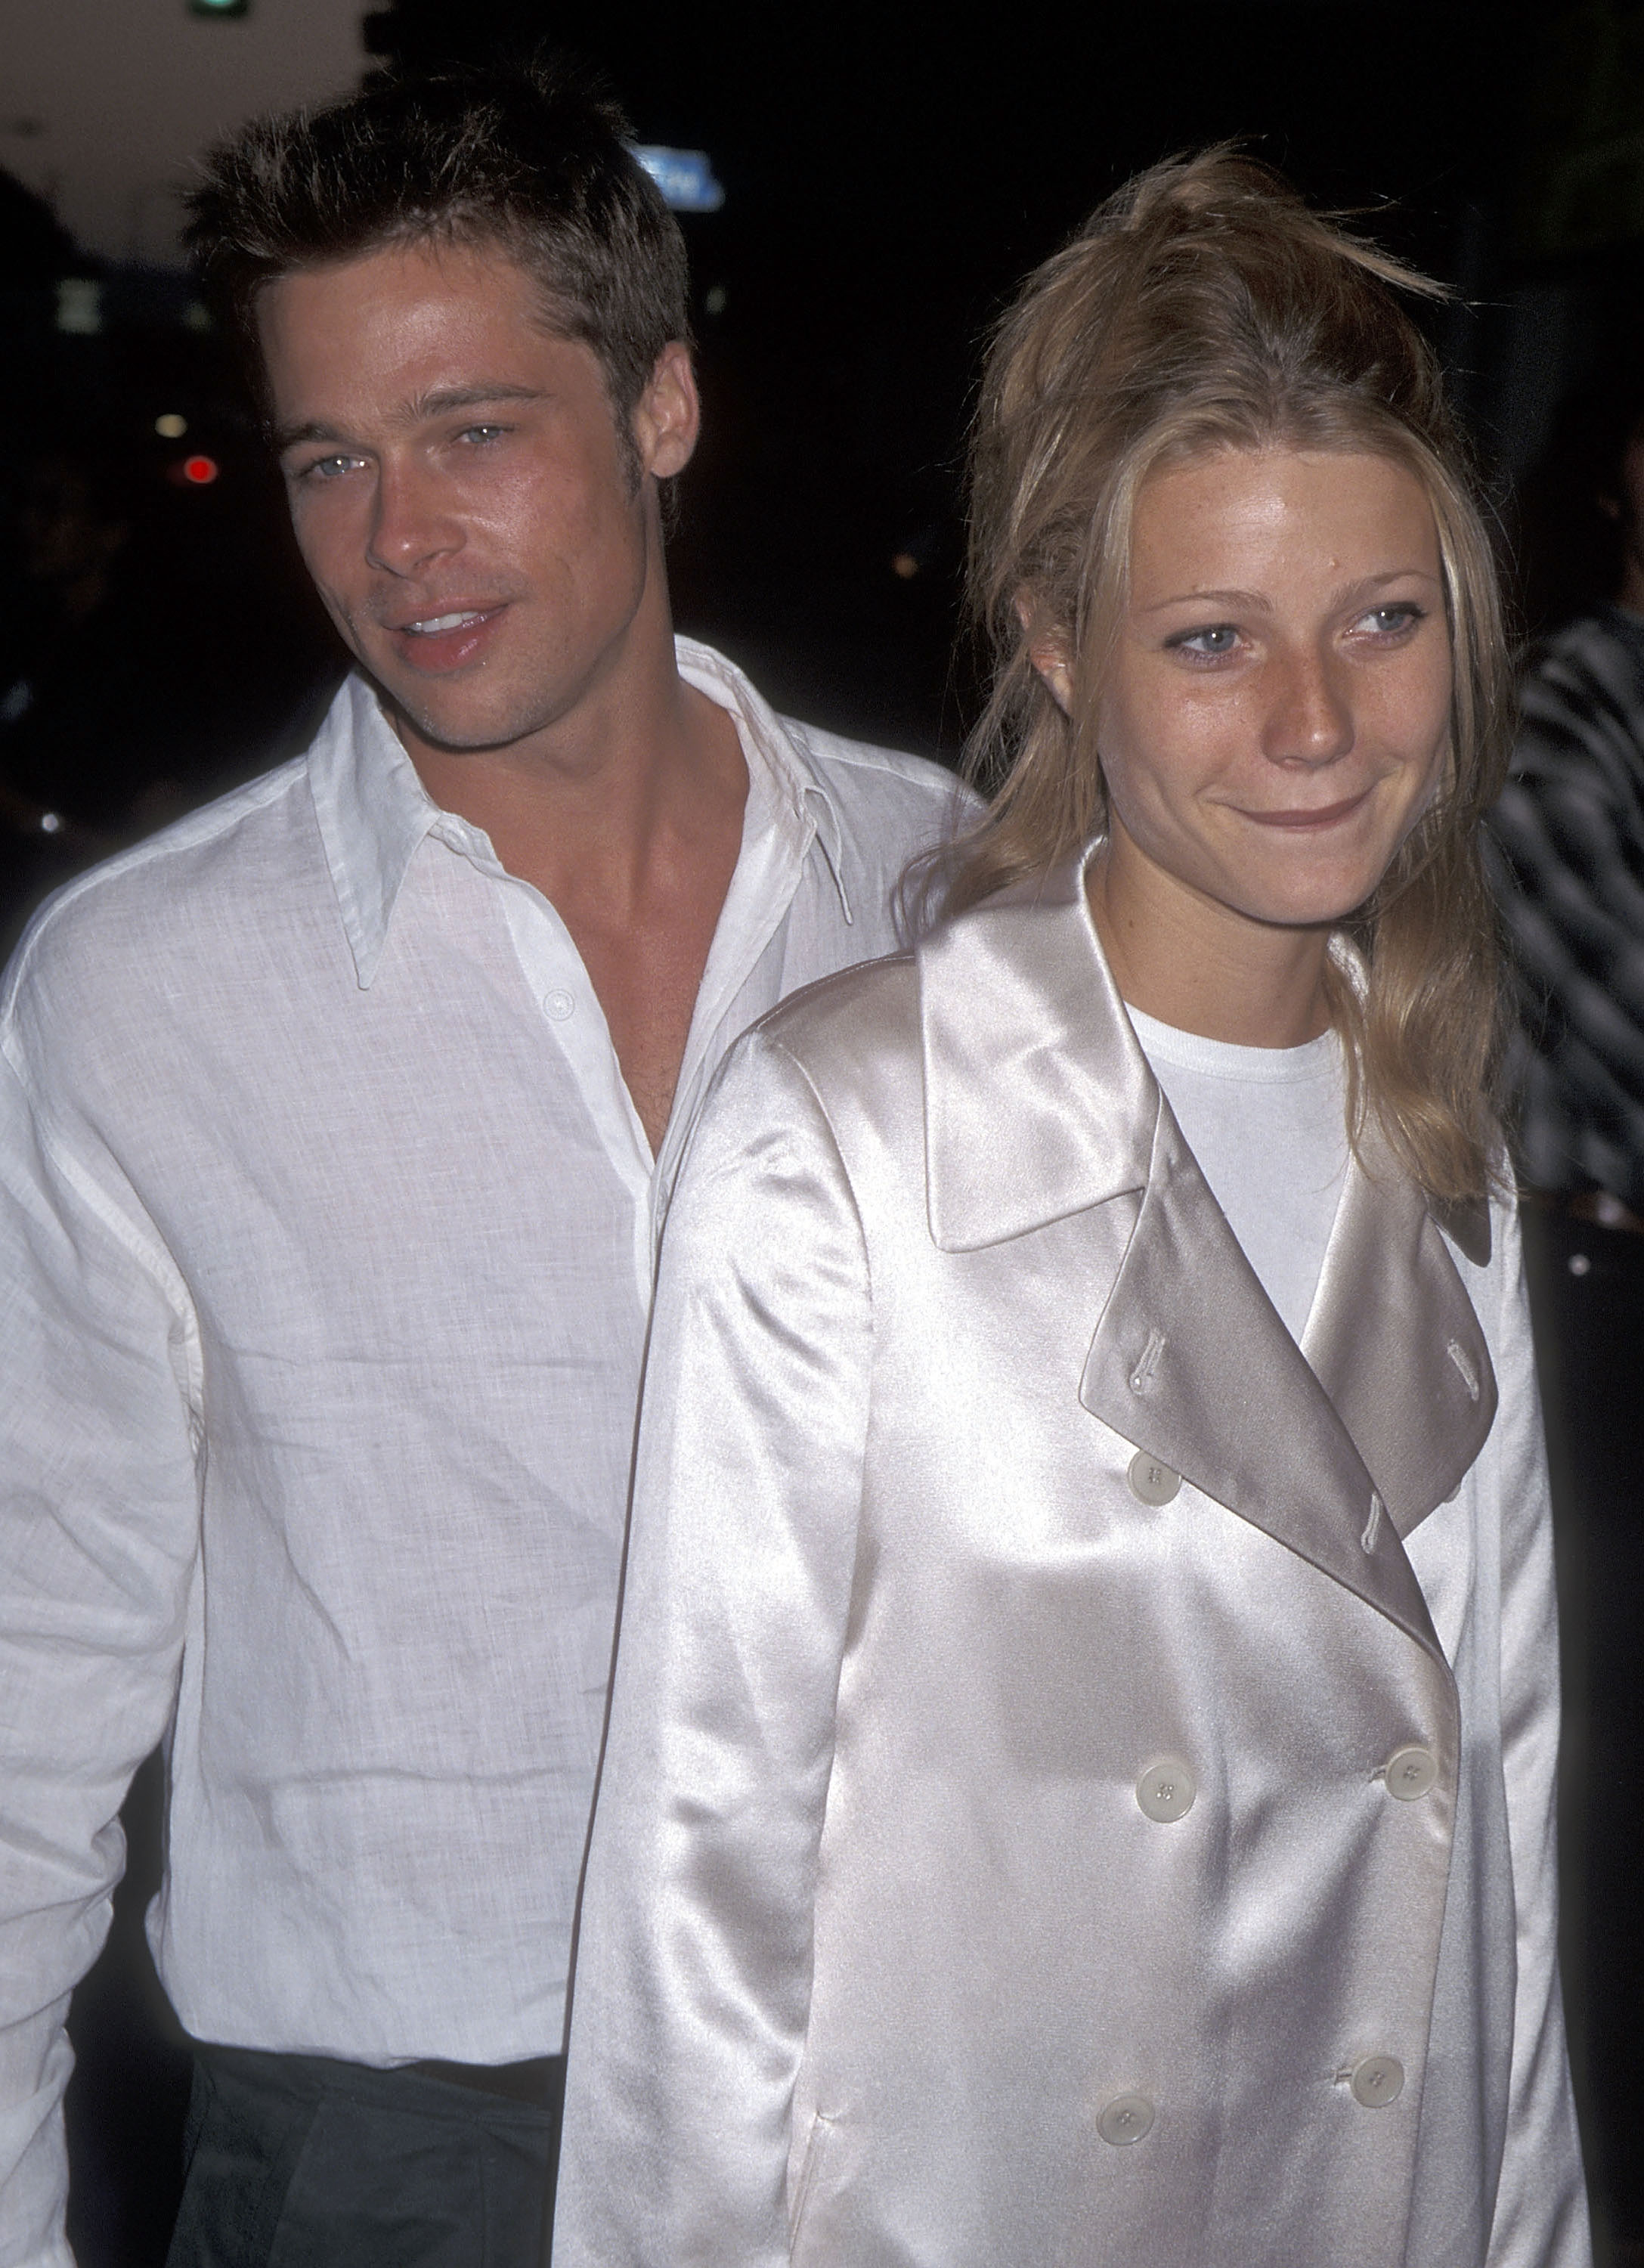 Brad Pitt and Gwyneth Paltrow at the "Living in Oblivion" West Los Angeles premiere on July 12, 1995, in West Los Angeles, California | Source: Getty Images